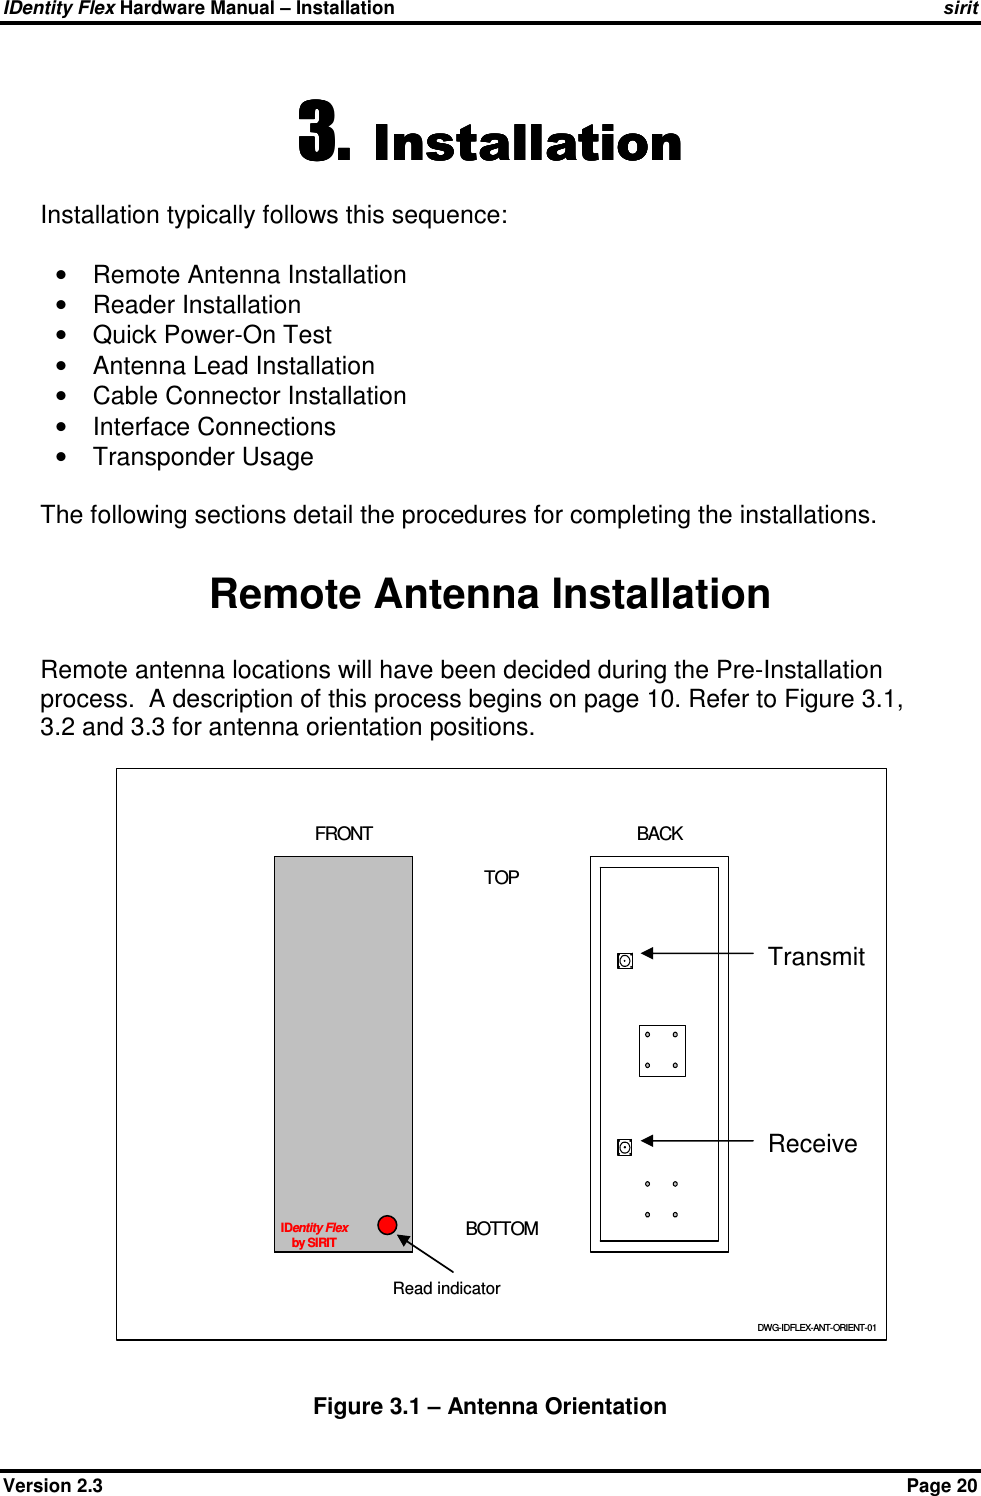 IDentity Flex Hardware Manual – Installation    sirit Version 2.3    Page 20 3.3.3.3. InstallationInstallationInstallationInstallation    Installation typically follows this sequence:  •  Remote Antenna Installation •  Reader Installation •  Quick Power-On Test •  Antenna Lead Installation •  Cable Connector Installation •  Interface Connections •  Transponder Usage  The following sections detail the procedures for completing the installations.    Remote Antenna Installation Remote antenna locations will have been decided during the Pre-Installation process.  A description of this process begins on page 10. Refer to Figure 3.1, 3.2 and 3.3 for antenna orientation positions.  Figure 3.1 – Antenna Orientation IDentity Flexby SIRITDWG-IDFLEX-ANT-ORIENT-01TOPBOTTOMFRONT BACKRead indicator Transmit Receive 